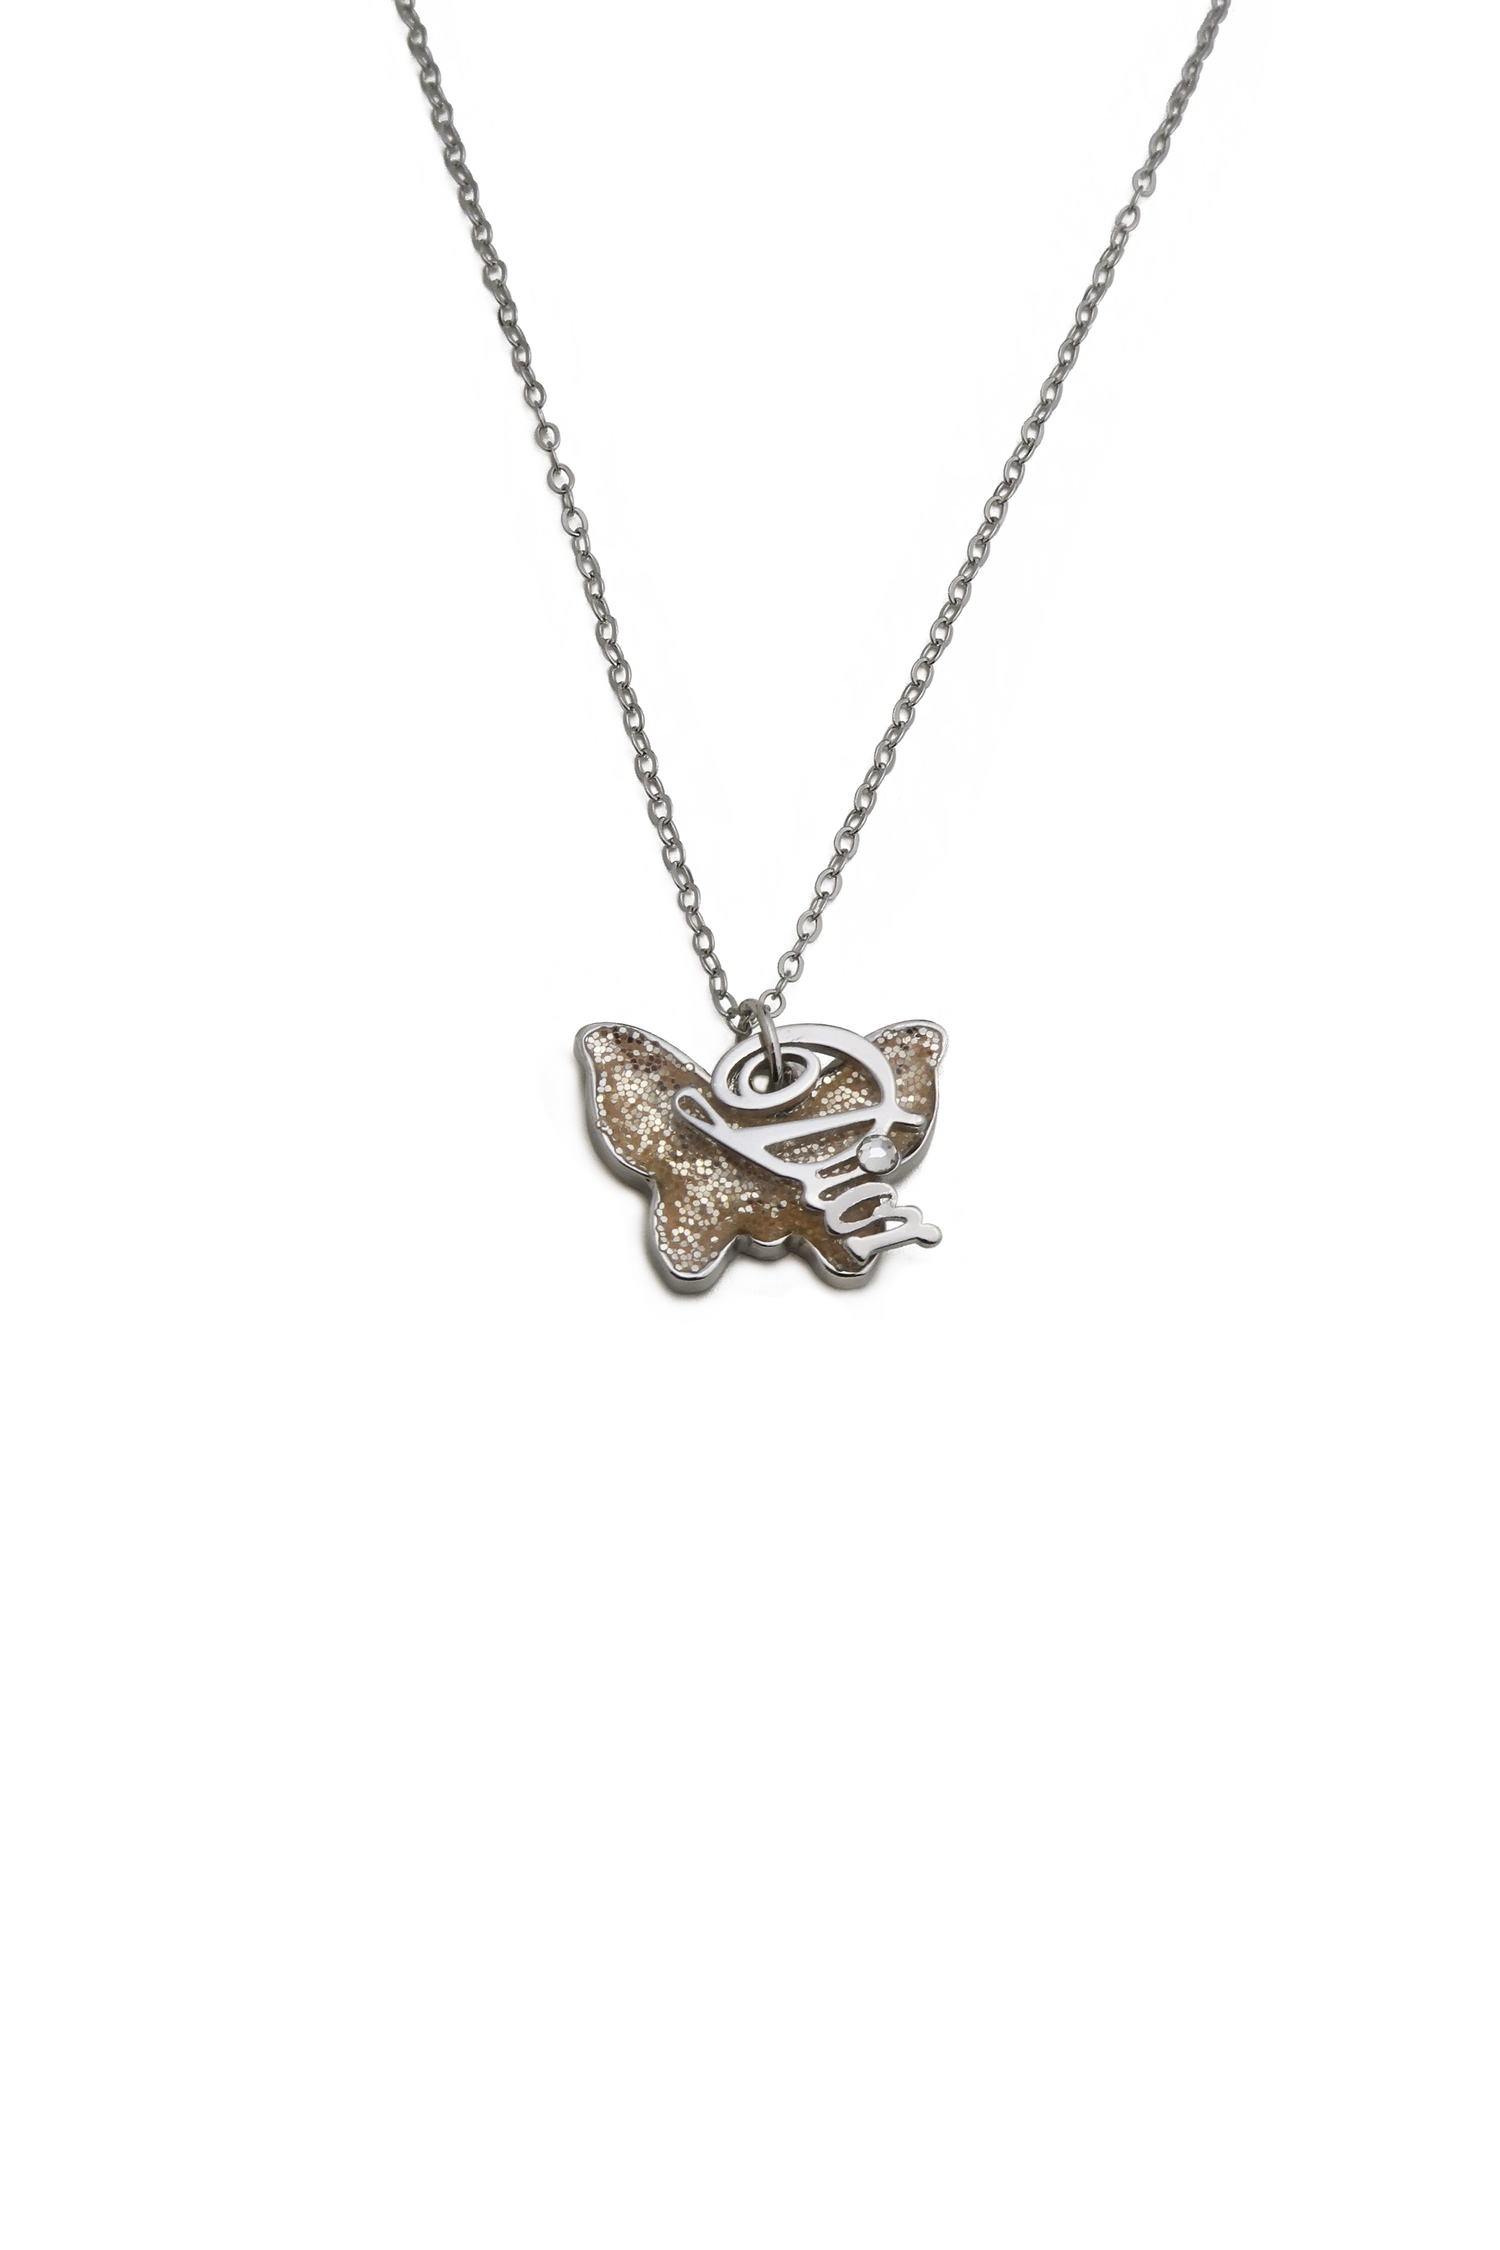 Authentic Dior Repurposed Pink Butterfly Necklace — LUXE Reworked